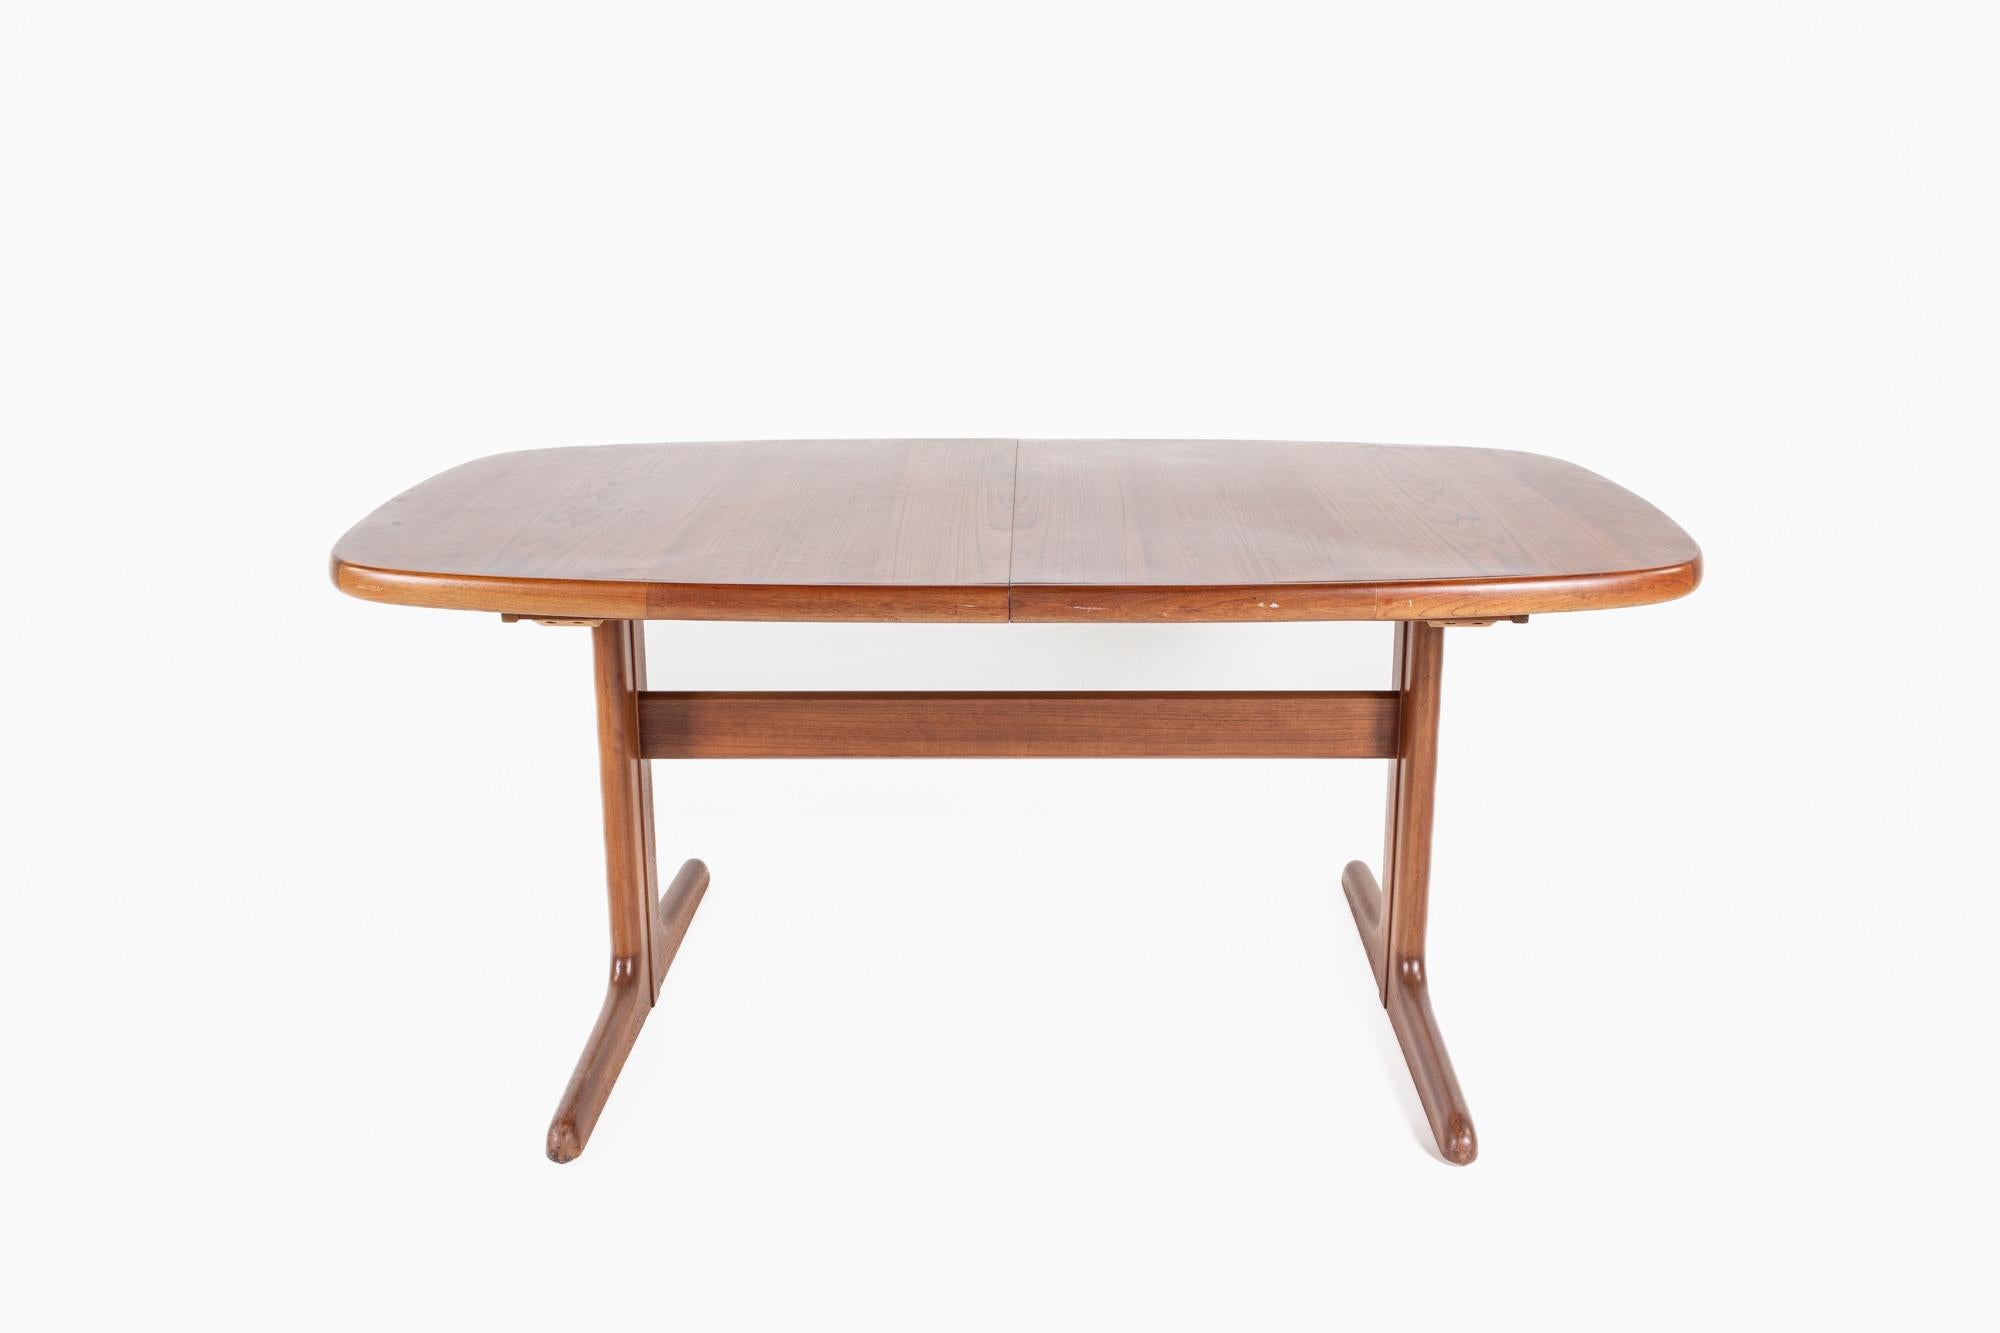 Dyrlund style mid century teak dining table

The table measures: 65 wide x 40 deep x 28 high, with a chair clearance of 26.5 inches 

All pieces of furniture can be had in what we call restored vintage condition. That means the piece is restored